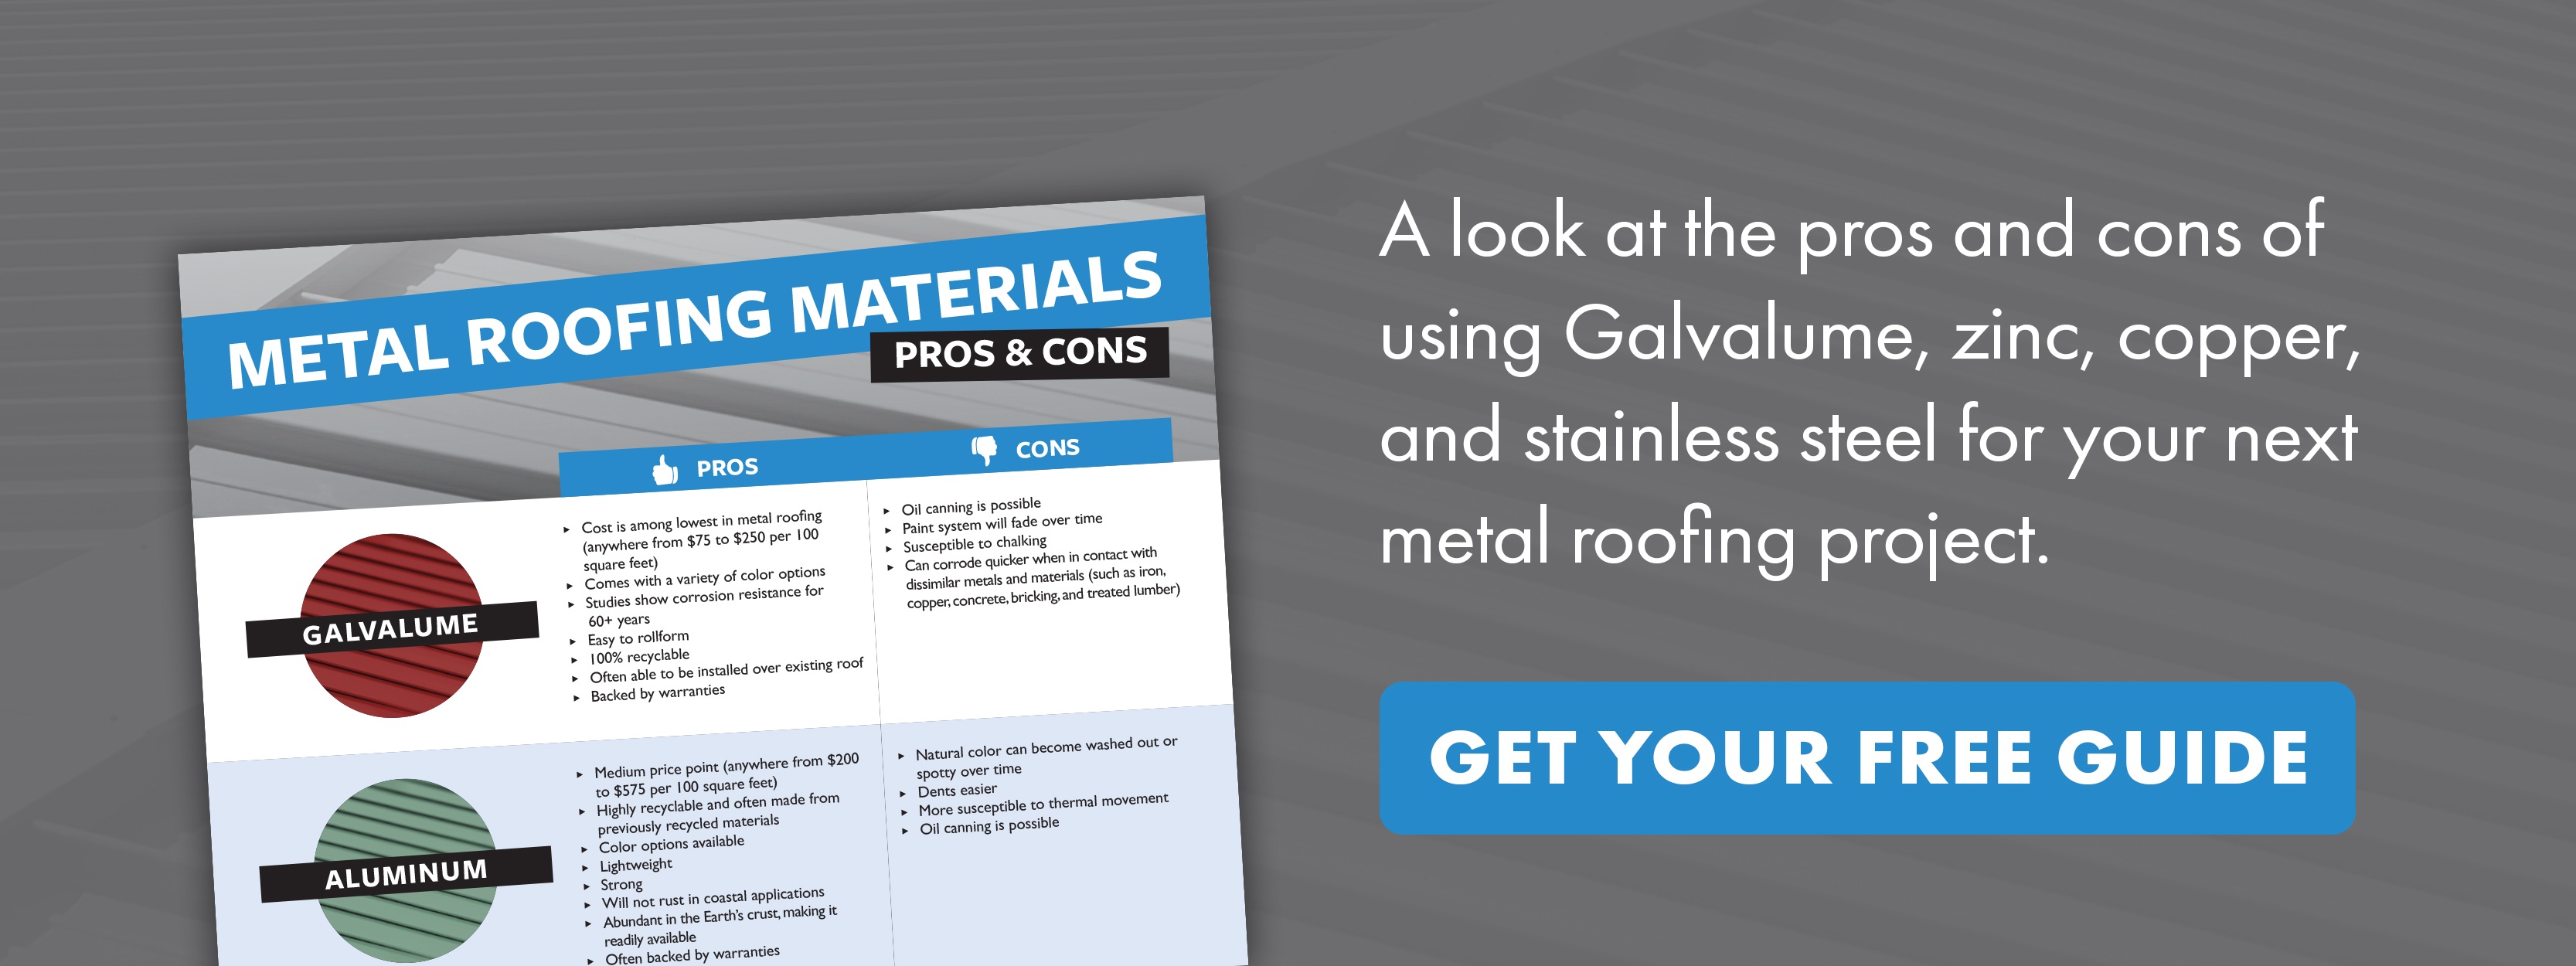 Metal Roofing Materials Pros & Cons Guide - Embed